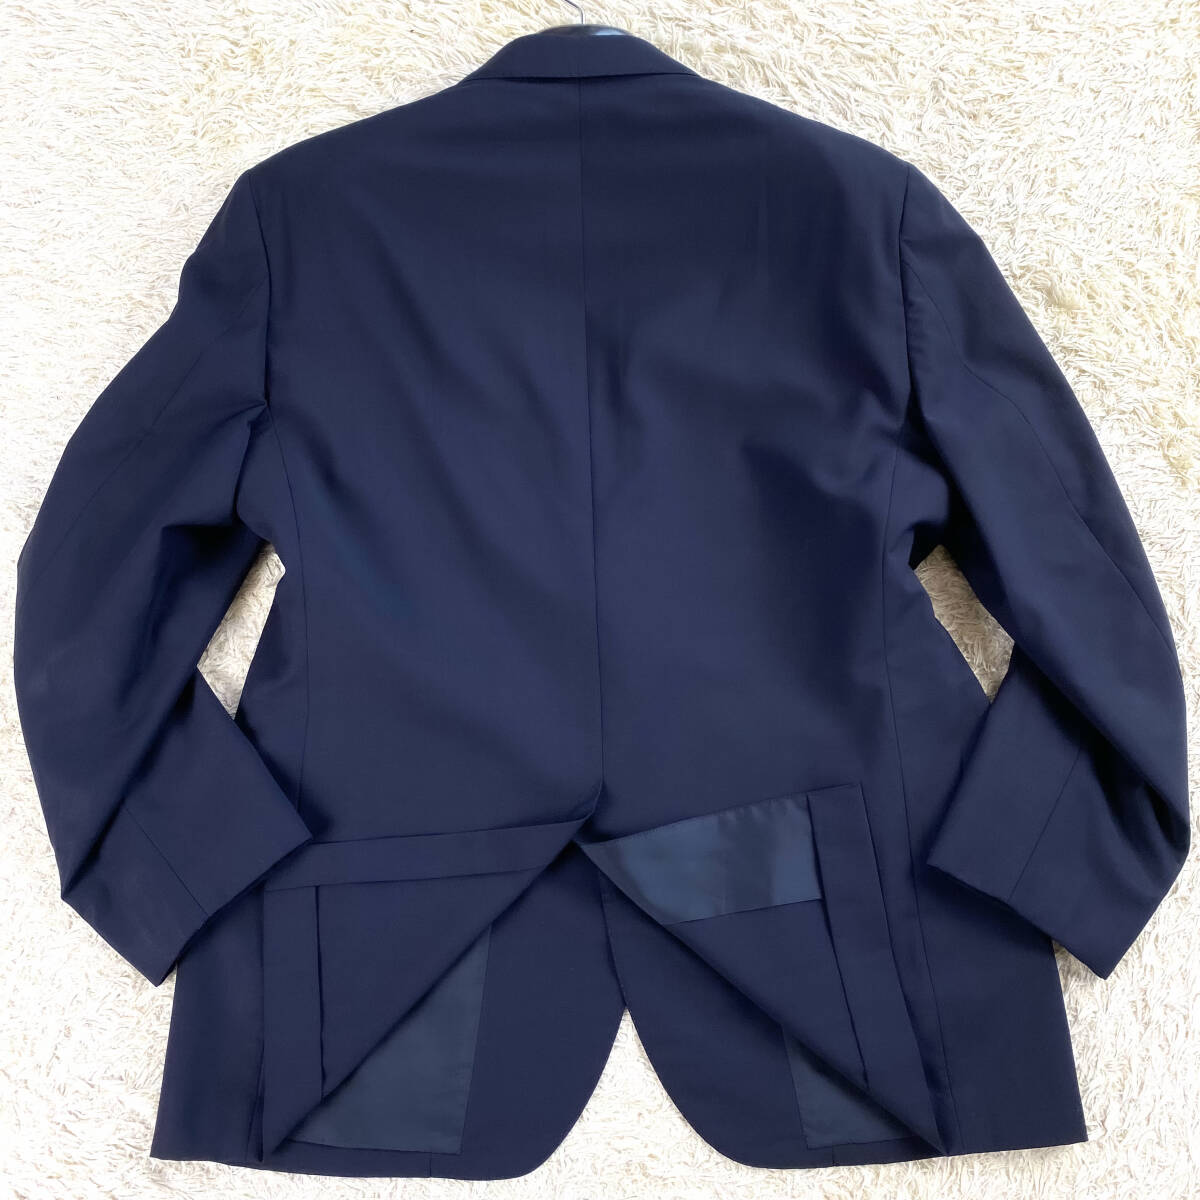  beautiful goods rare XL.LL~L!BROOKS BROTHERS setup suit wide design wide .. unlined in the back dark blue black navy 2 piece large . Brooks Brothers 